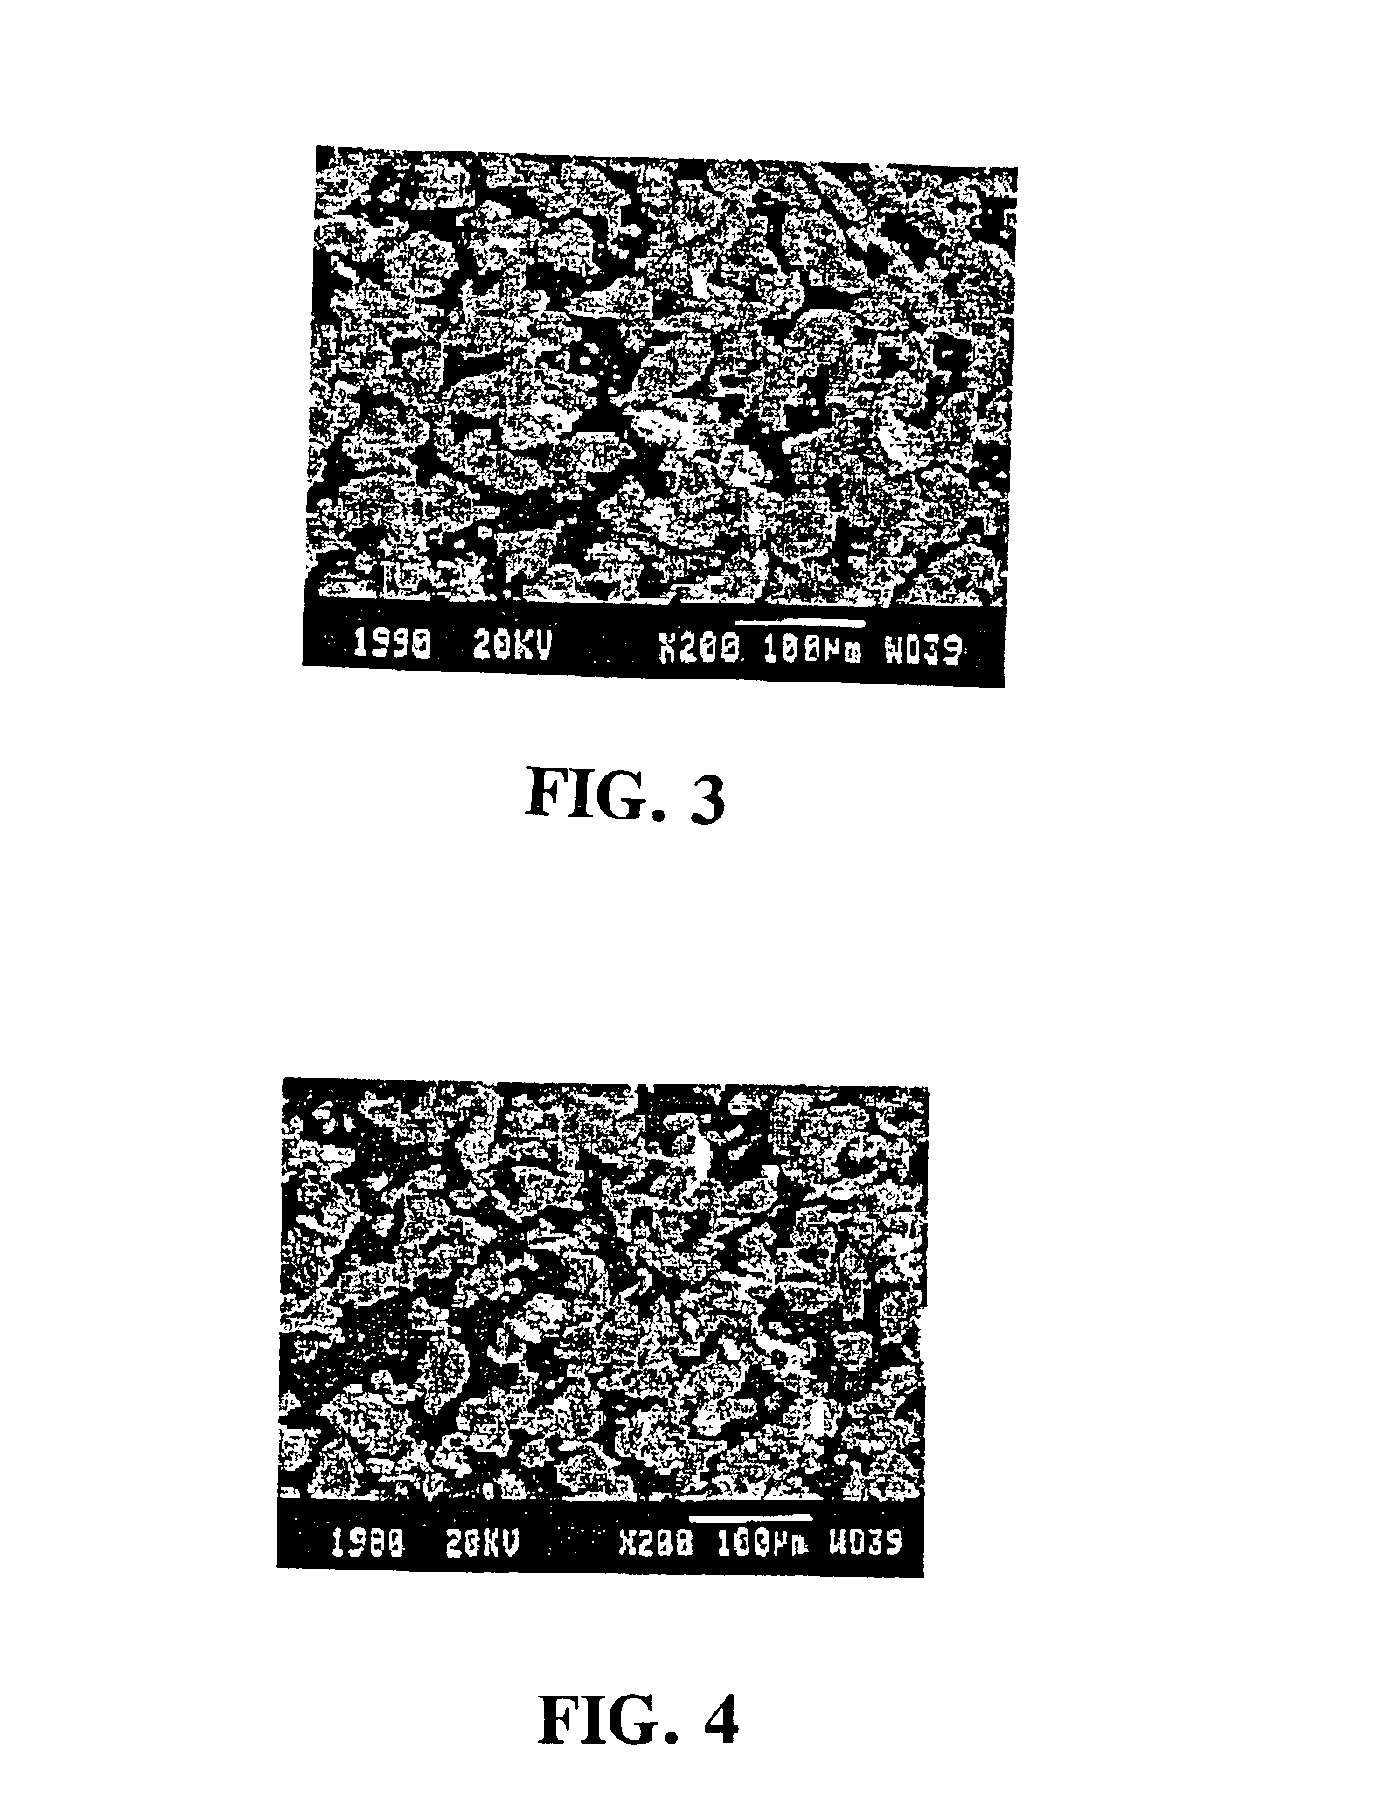 Methods for modifying oxygen content of atomized intermetallic aluminide powders and for forming articles from the modified powders